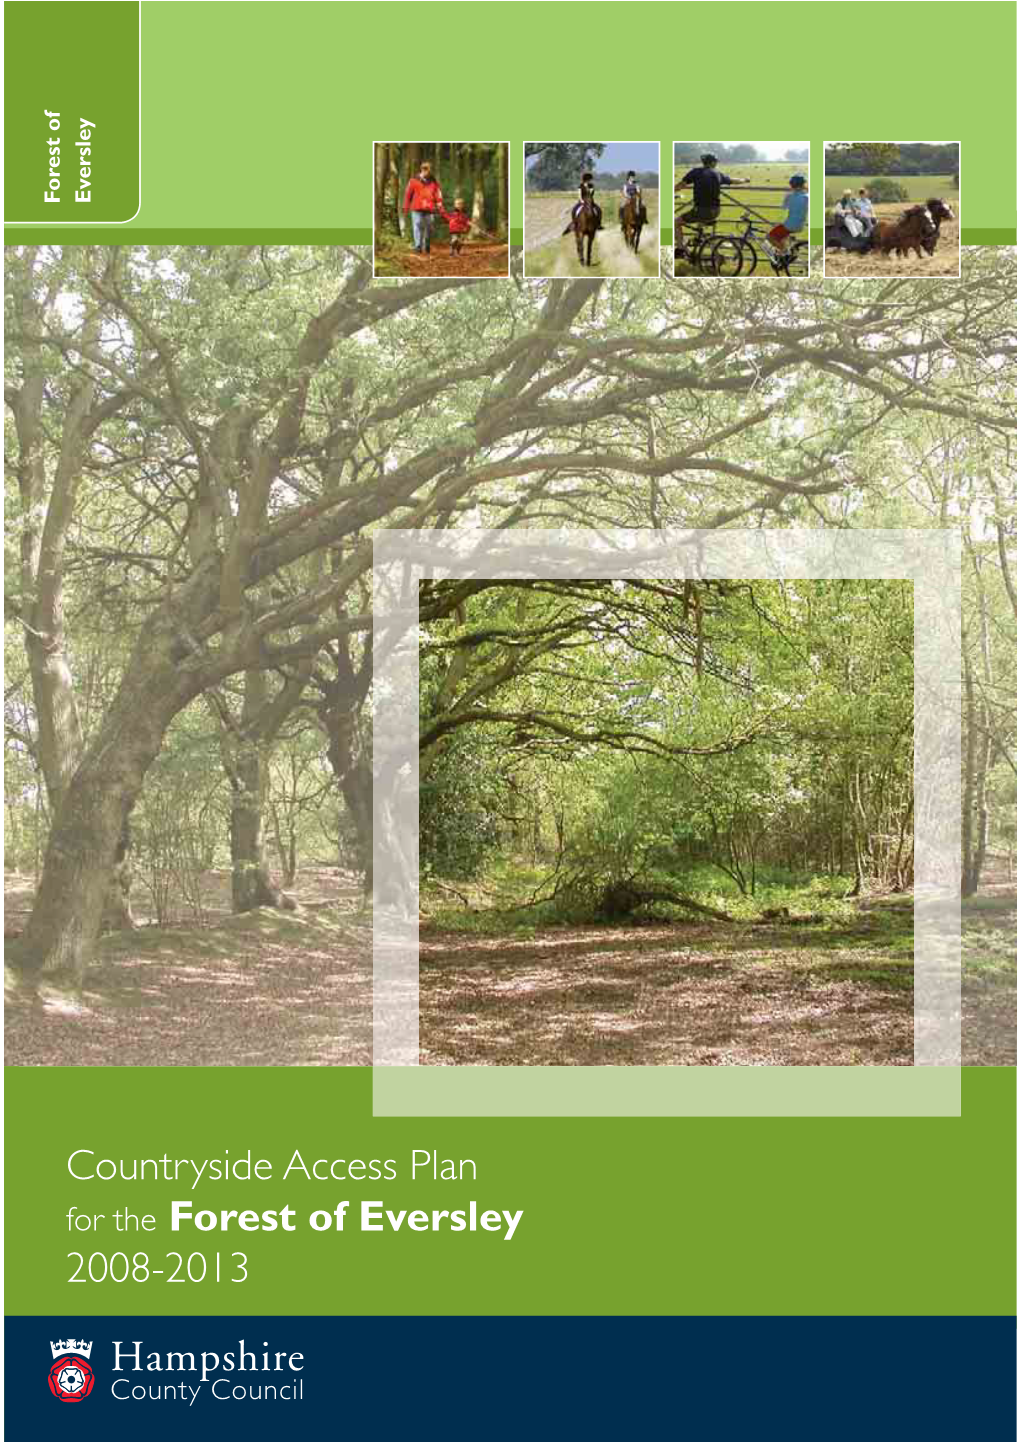 Countryside Access Plan for the Forest of Eversley 2008-2013